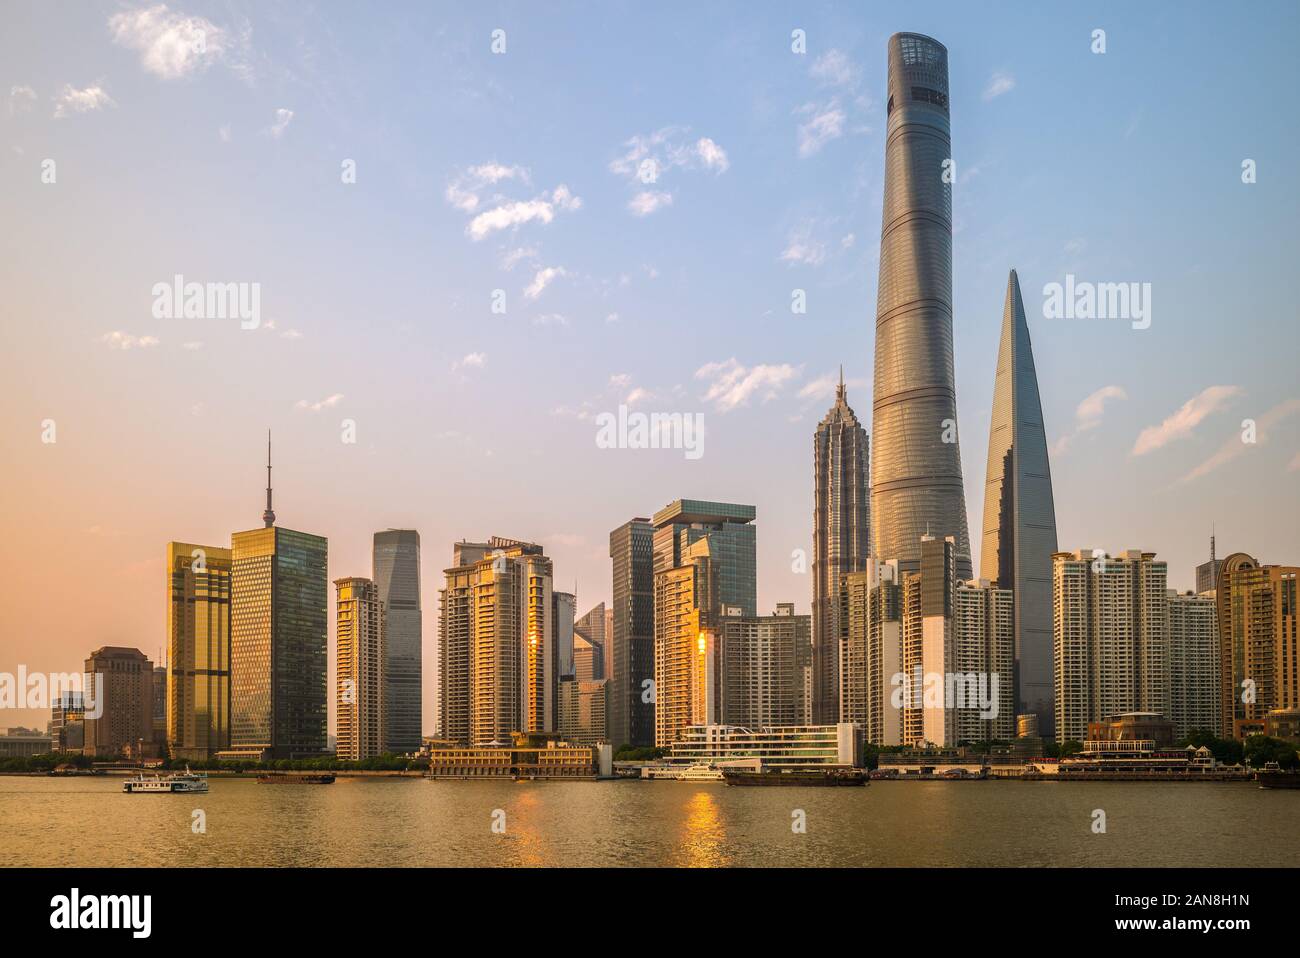 Skyline of Pudong by Huangpu River in Shanghai, China Stock Photo